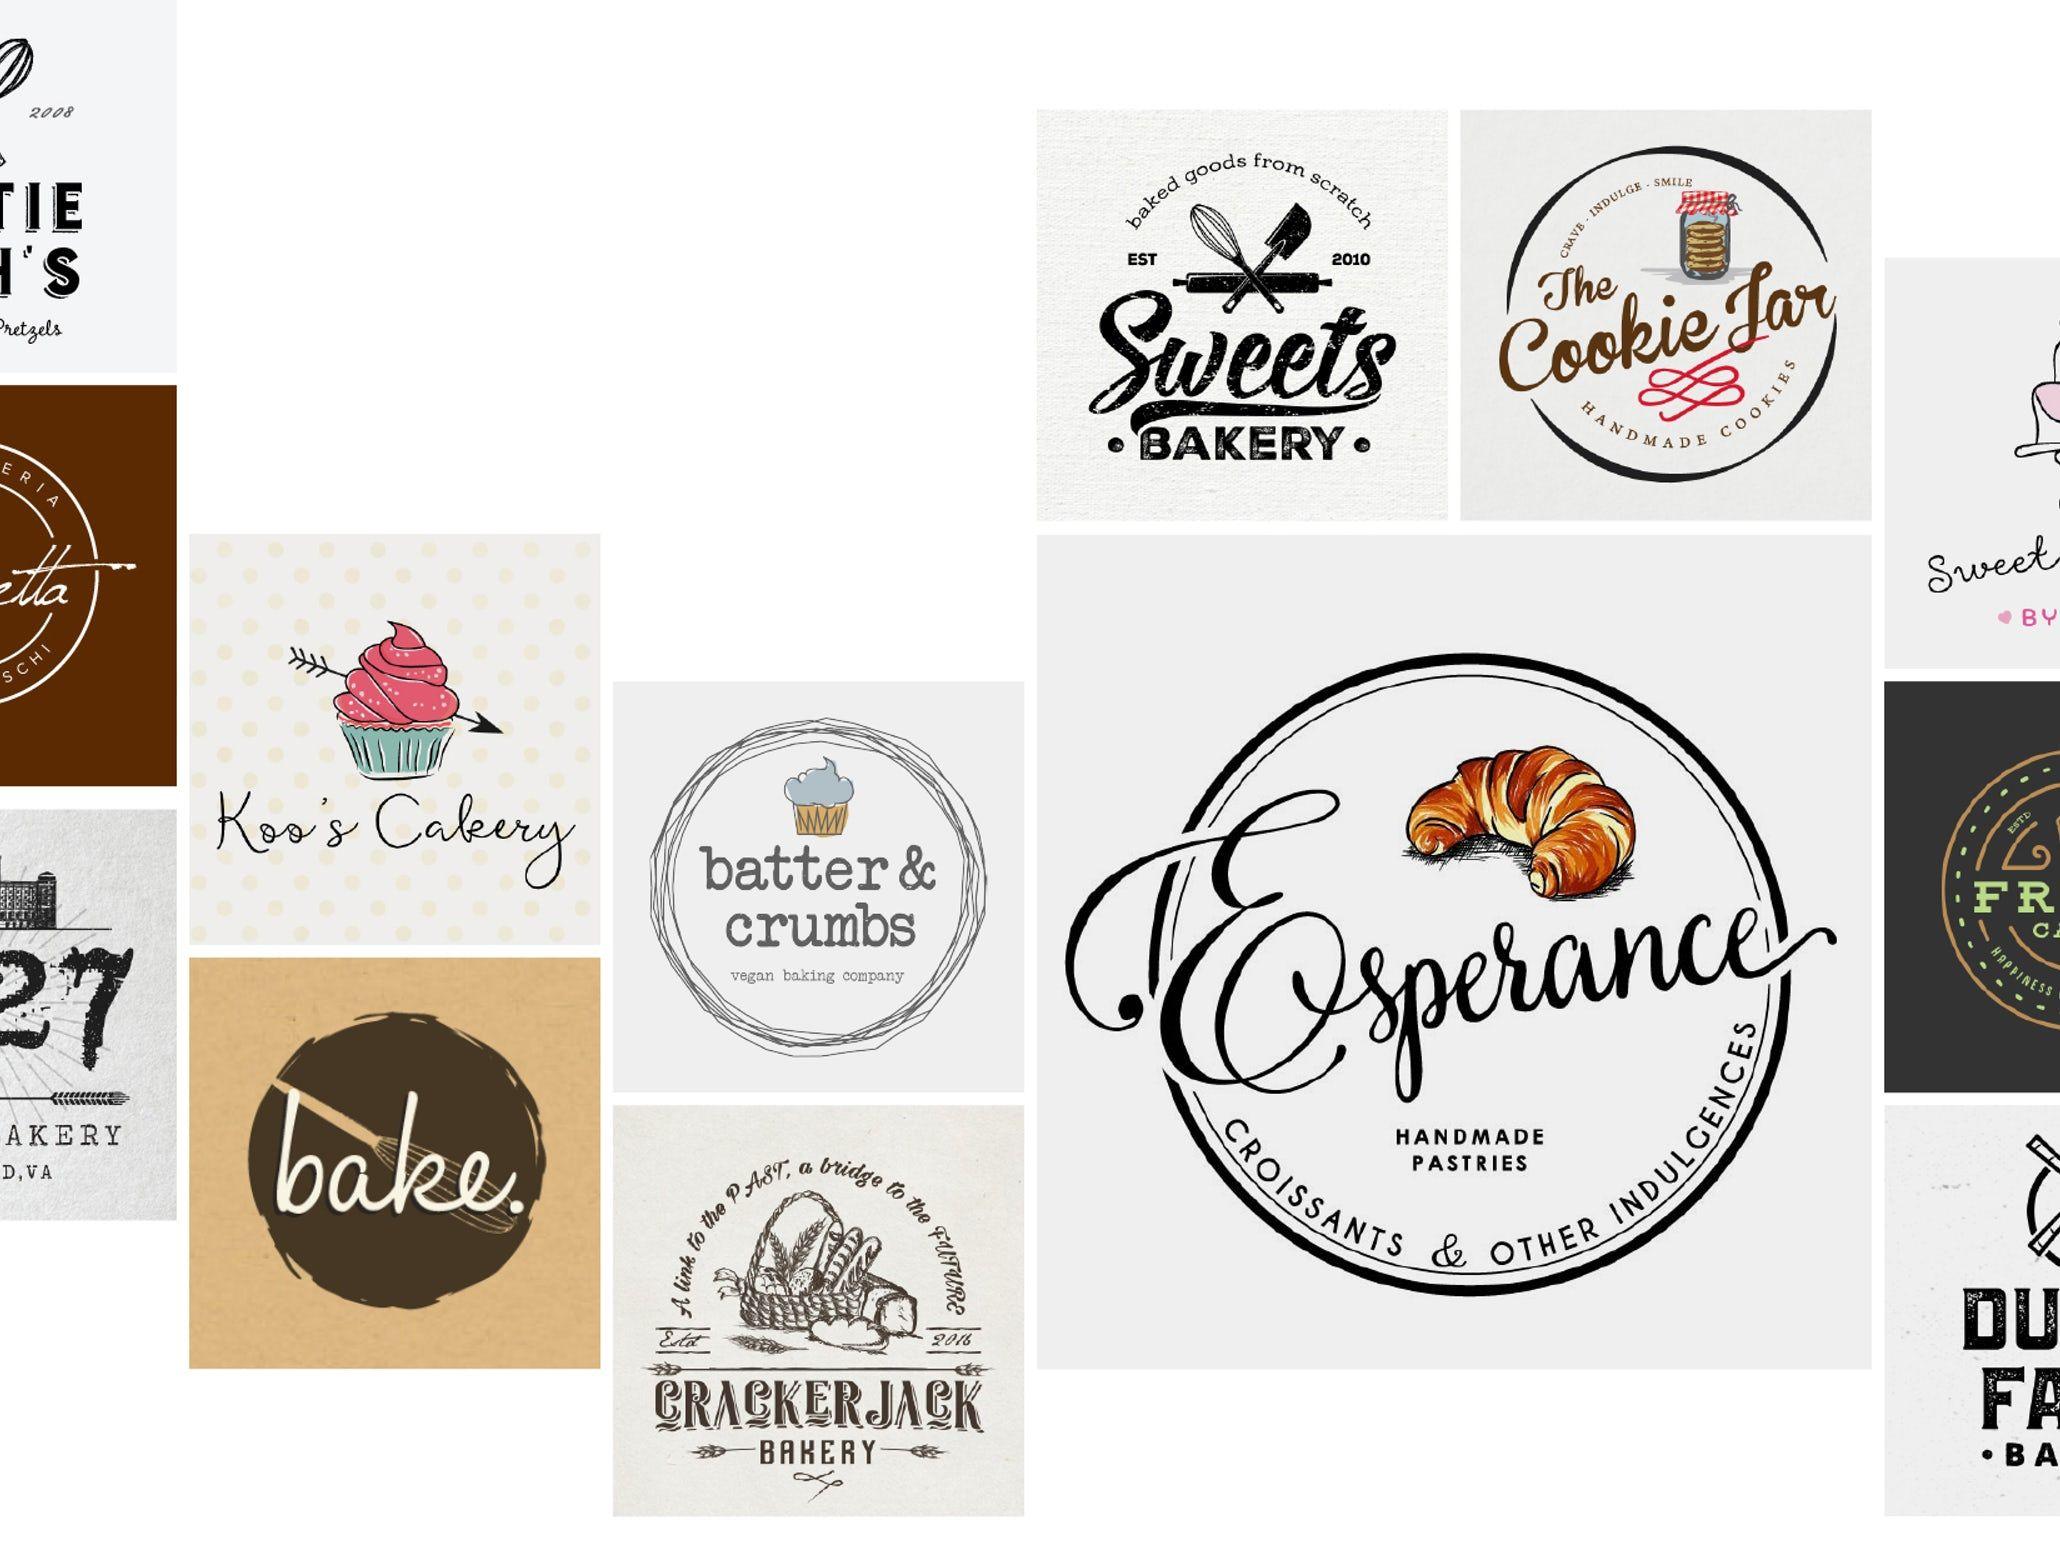 Backery Logo - 30 bakery logos that are totally sweet - 99designs